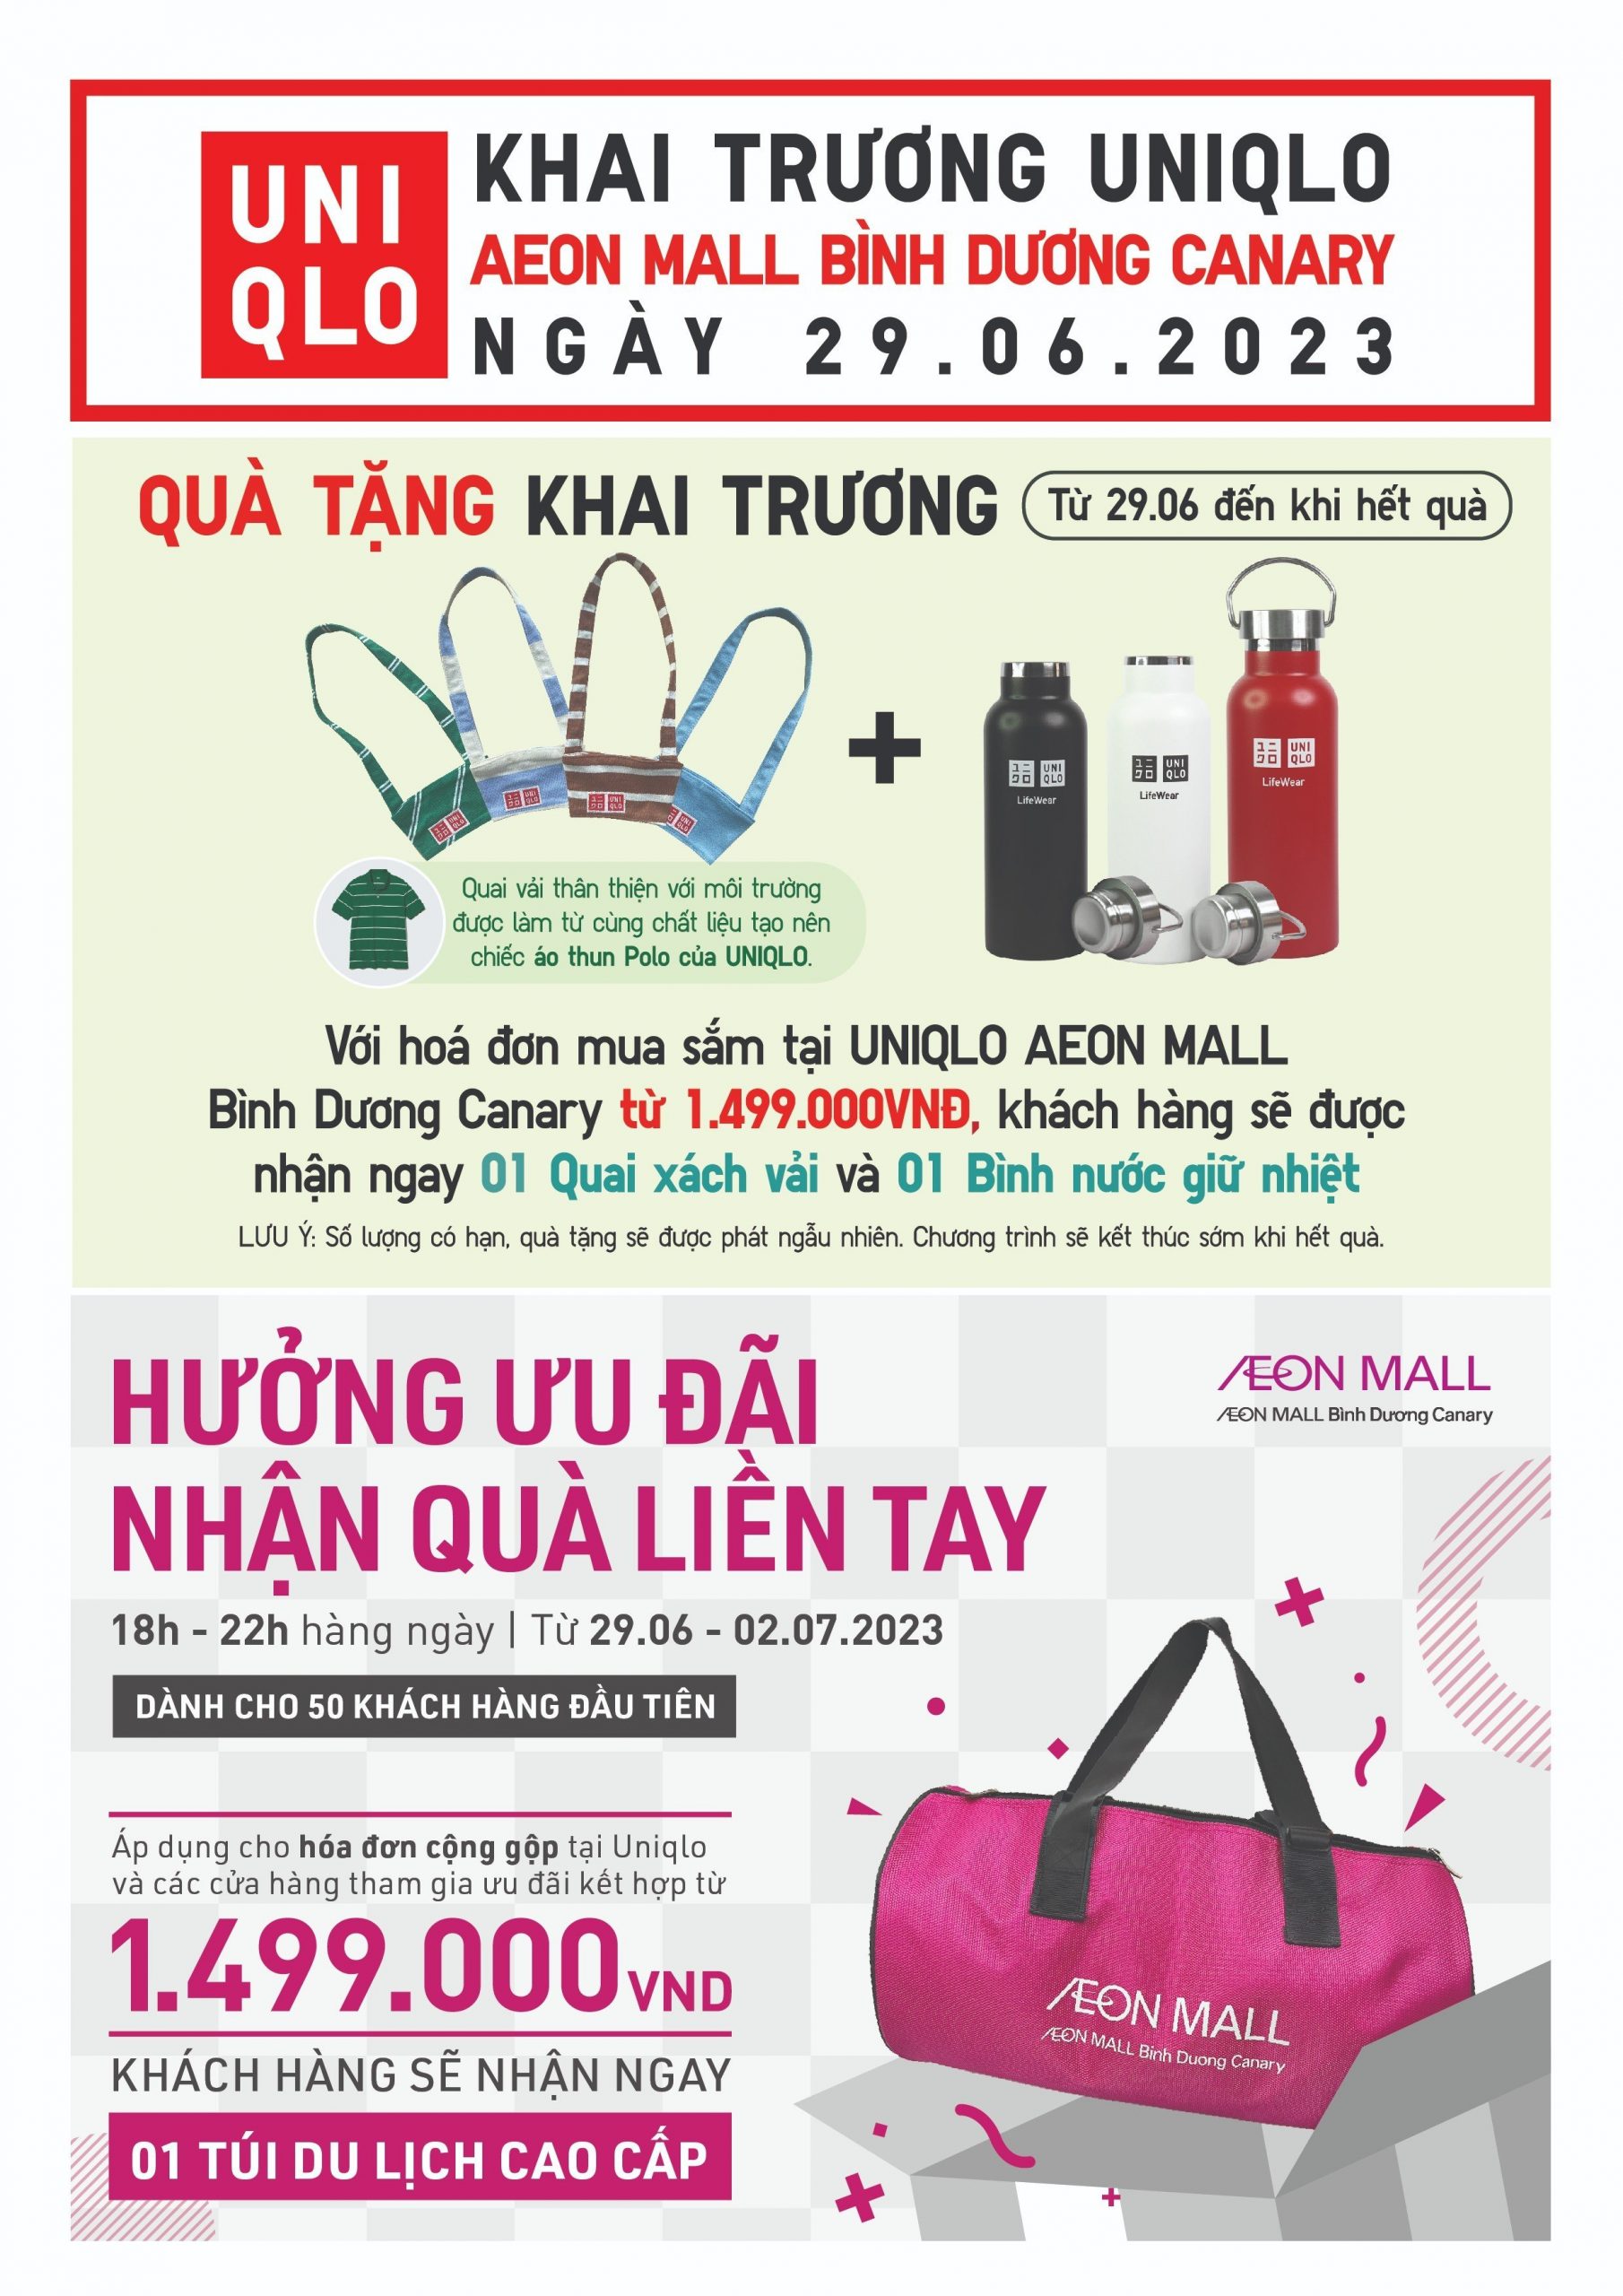 UNIQLO  HELLO SUMMER WITH SPECIAL PROMOTION  AEONMALL Bình Dương Canary